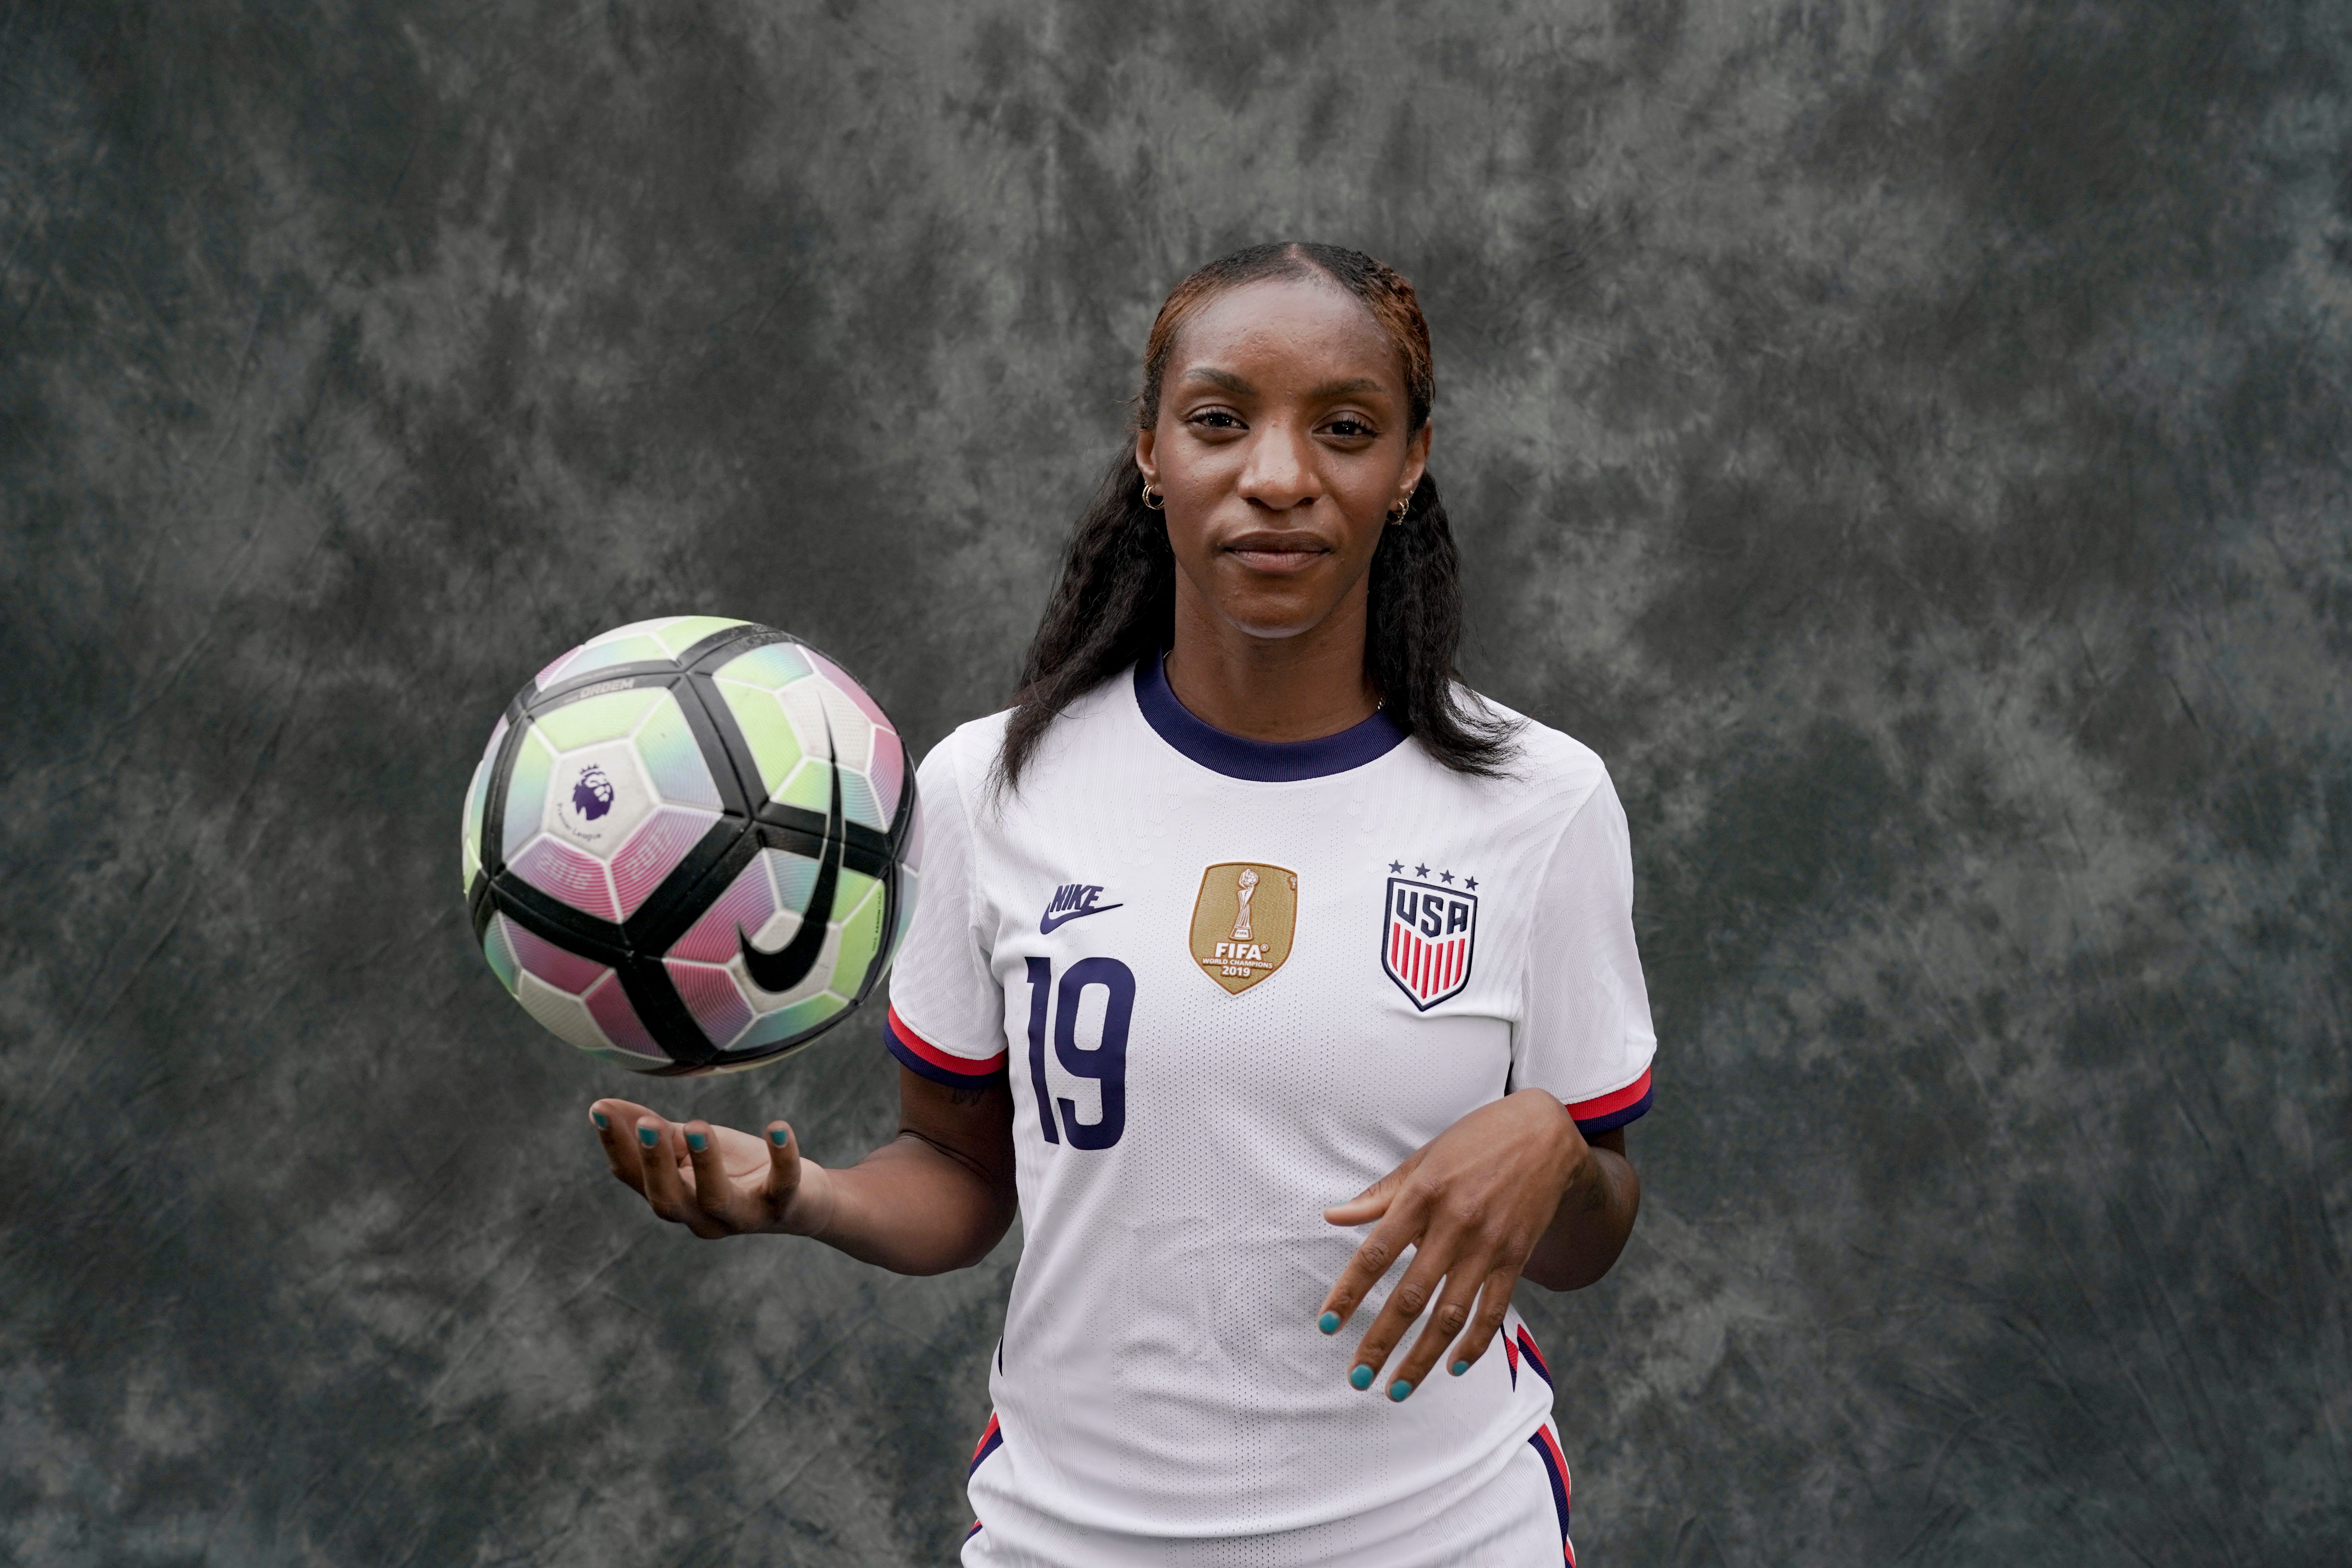 Crystal Dunn, a defender for U.S. women’s national soccer team, is an outspoken advocate for women’s rights and said she will not play in a state restricting reproductive healthcare.